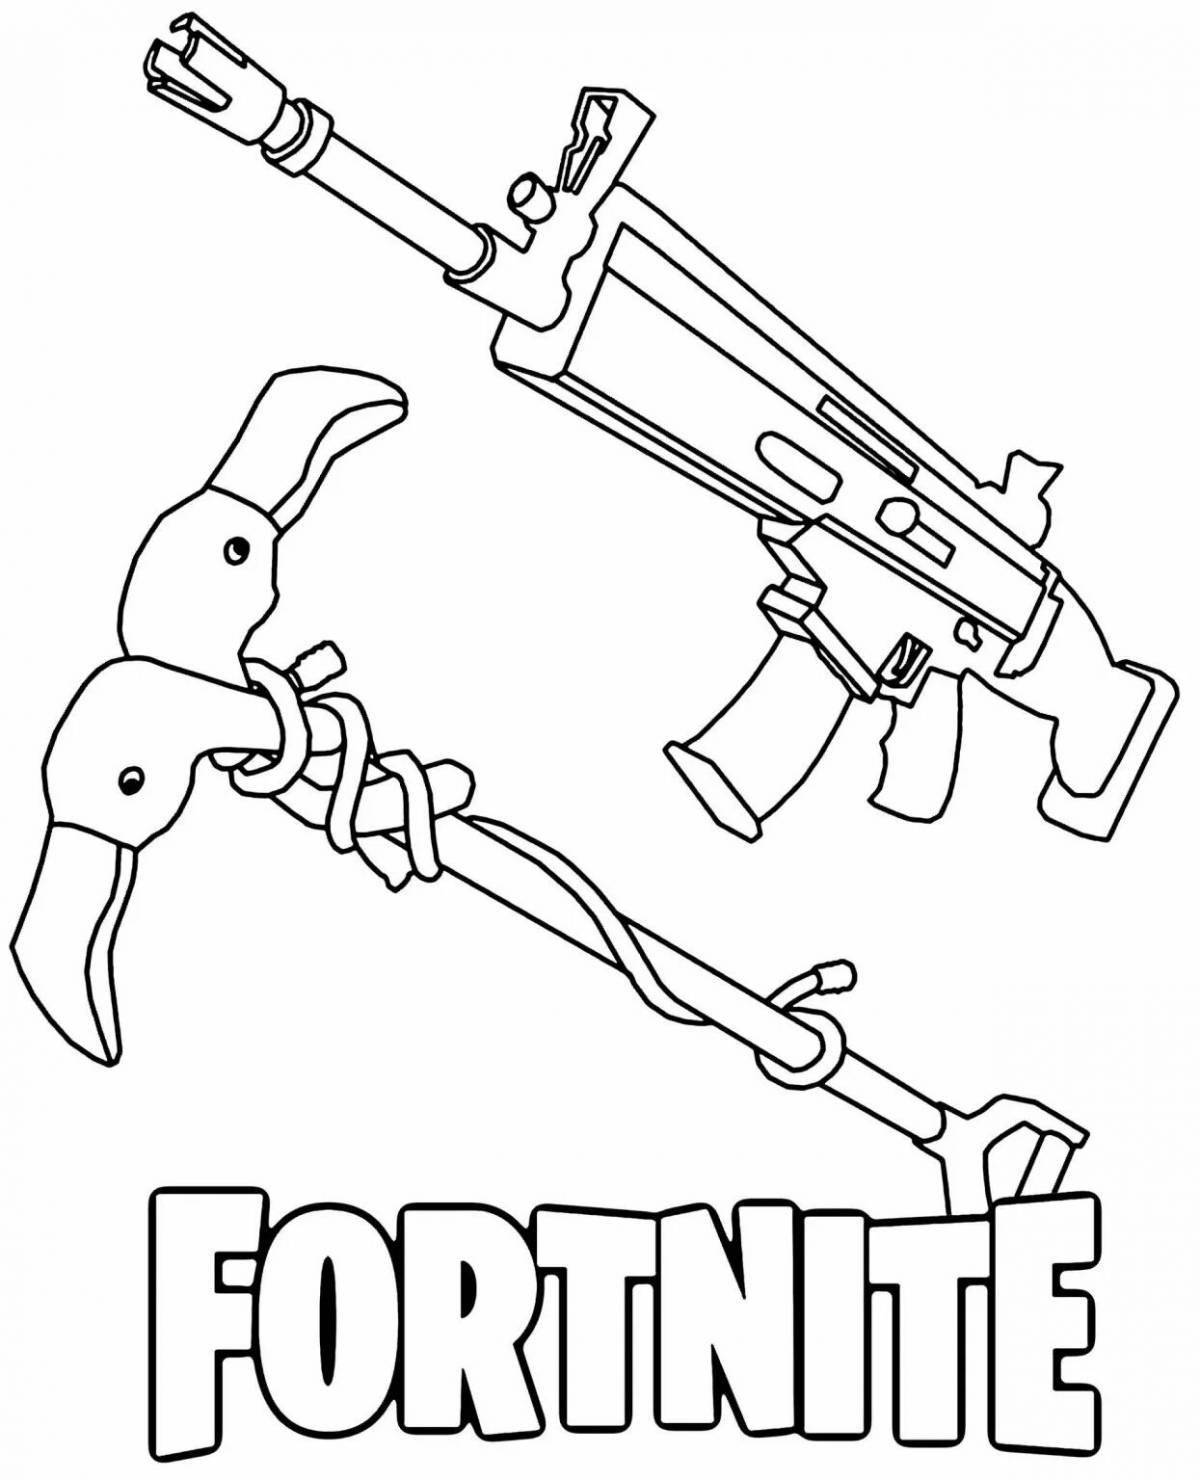 Awesome fortnite weapon coloring page